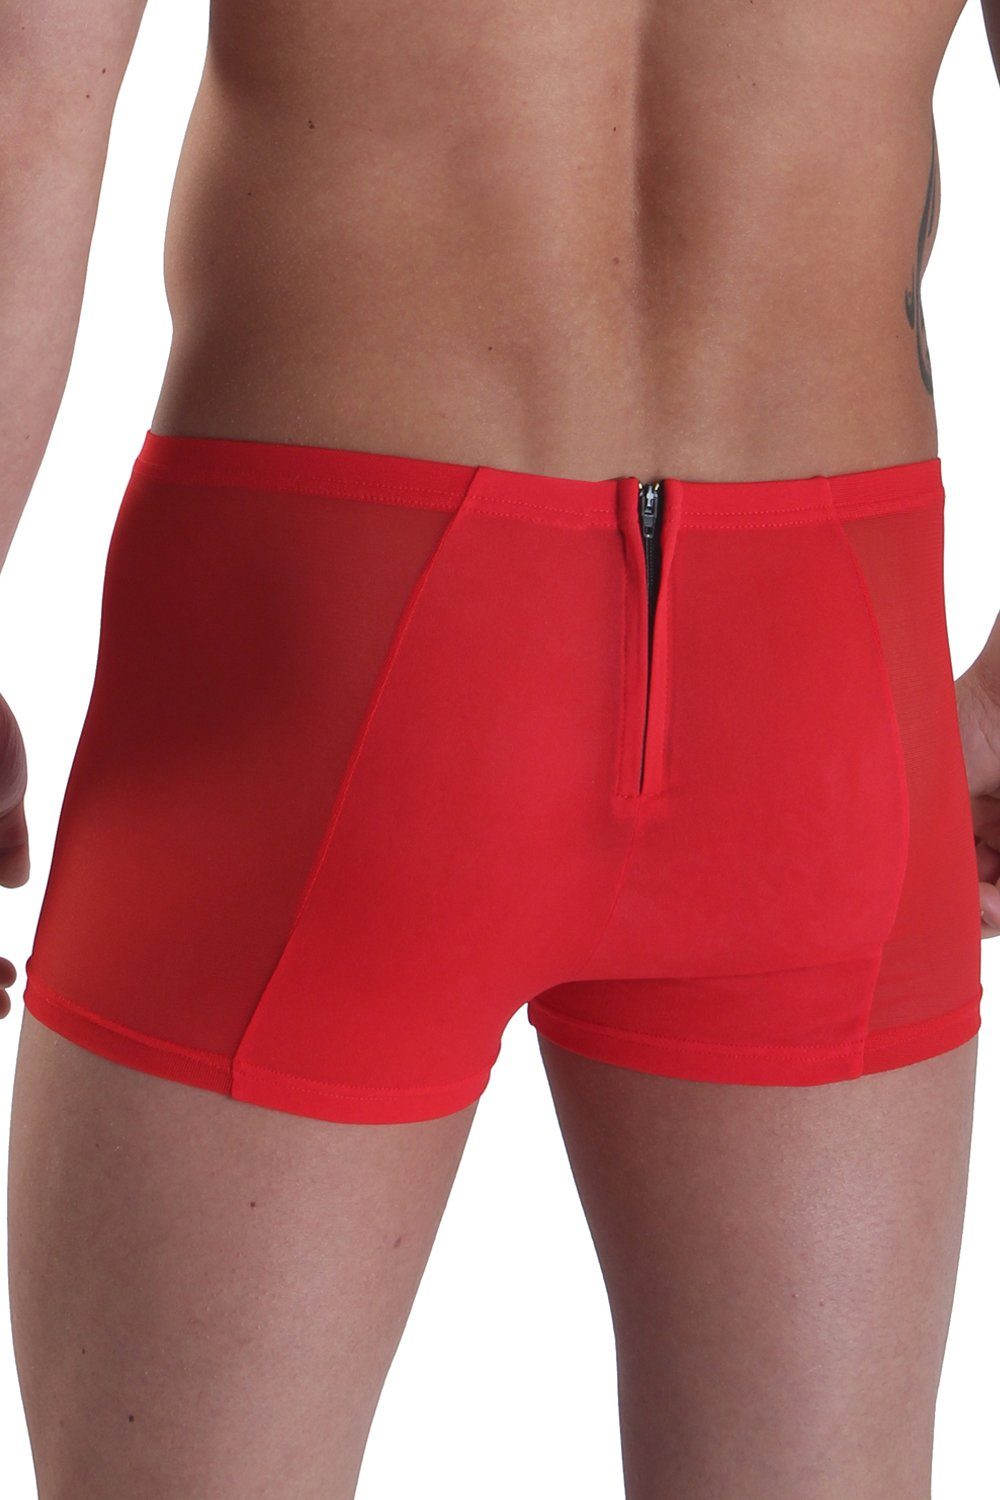 LOOK ME Boxershorts in rot XL 